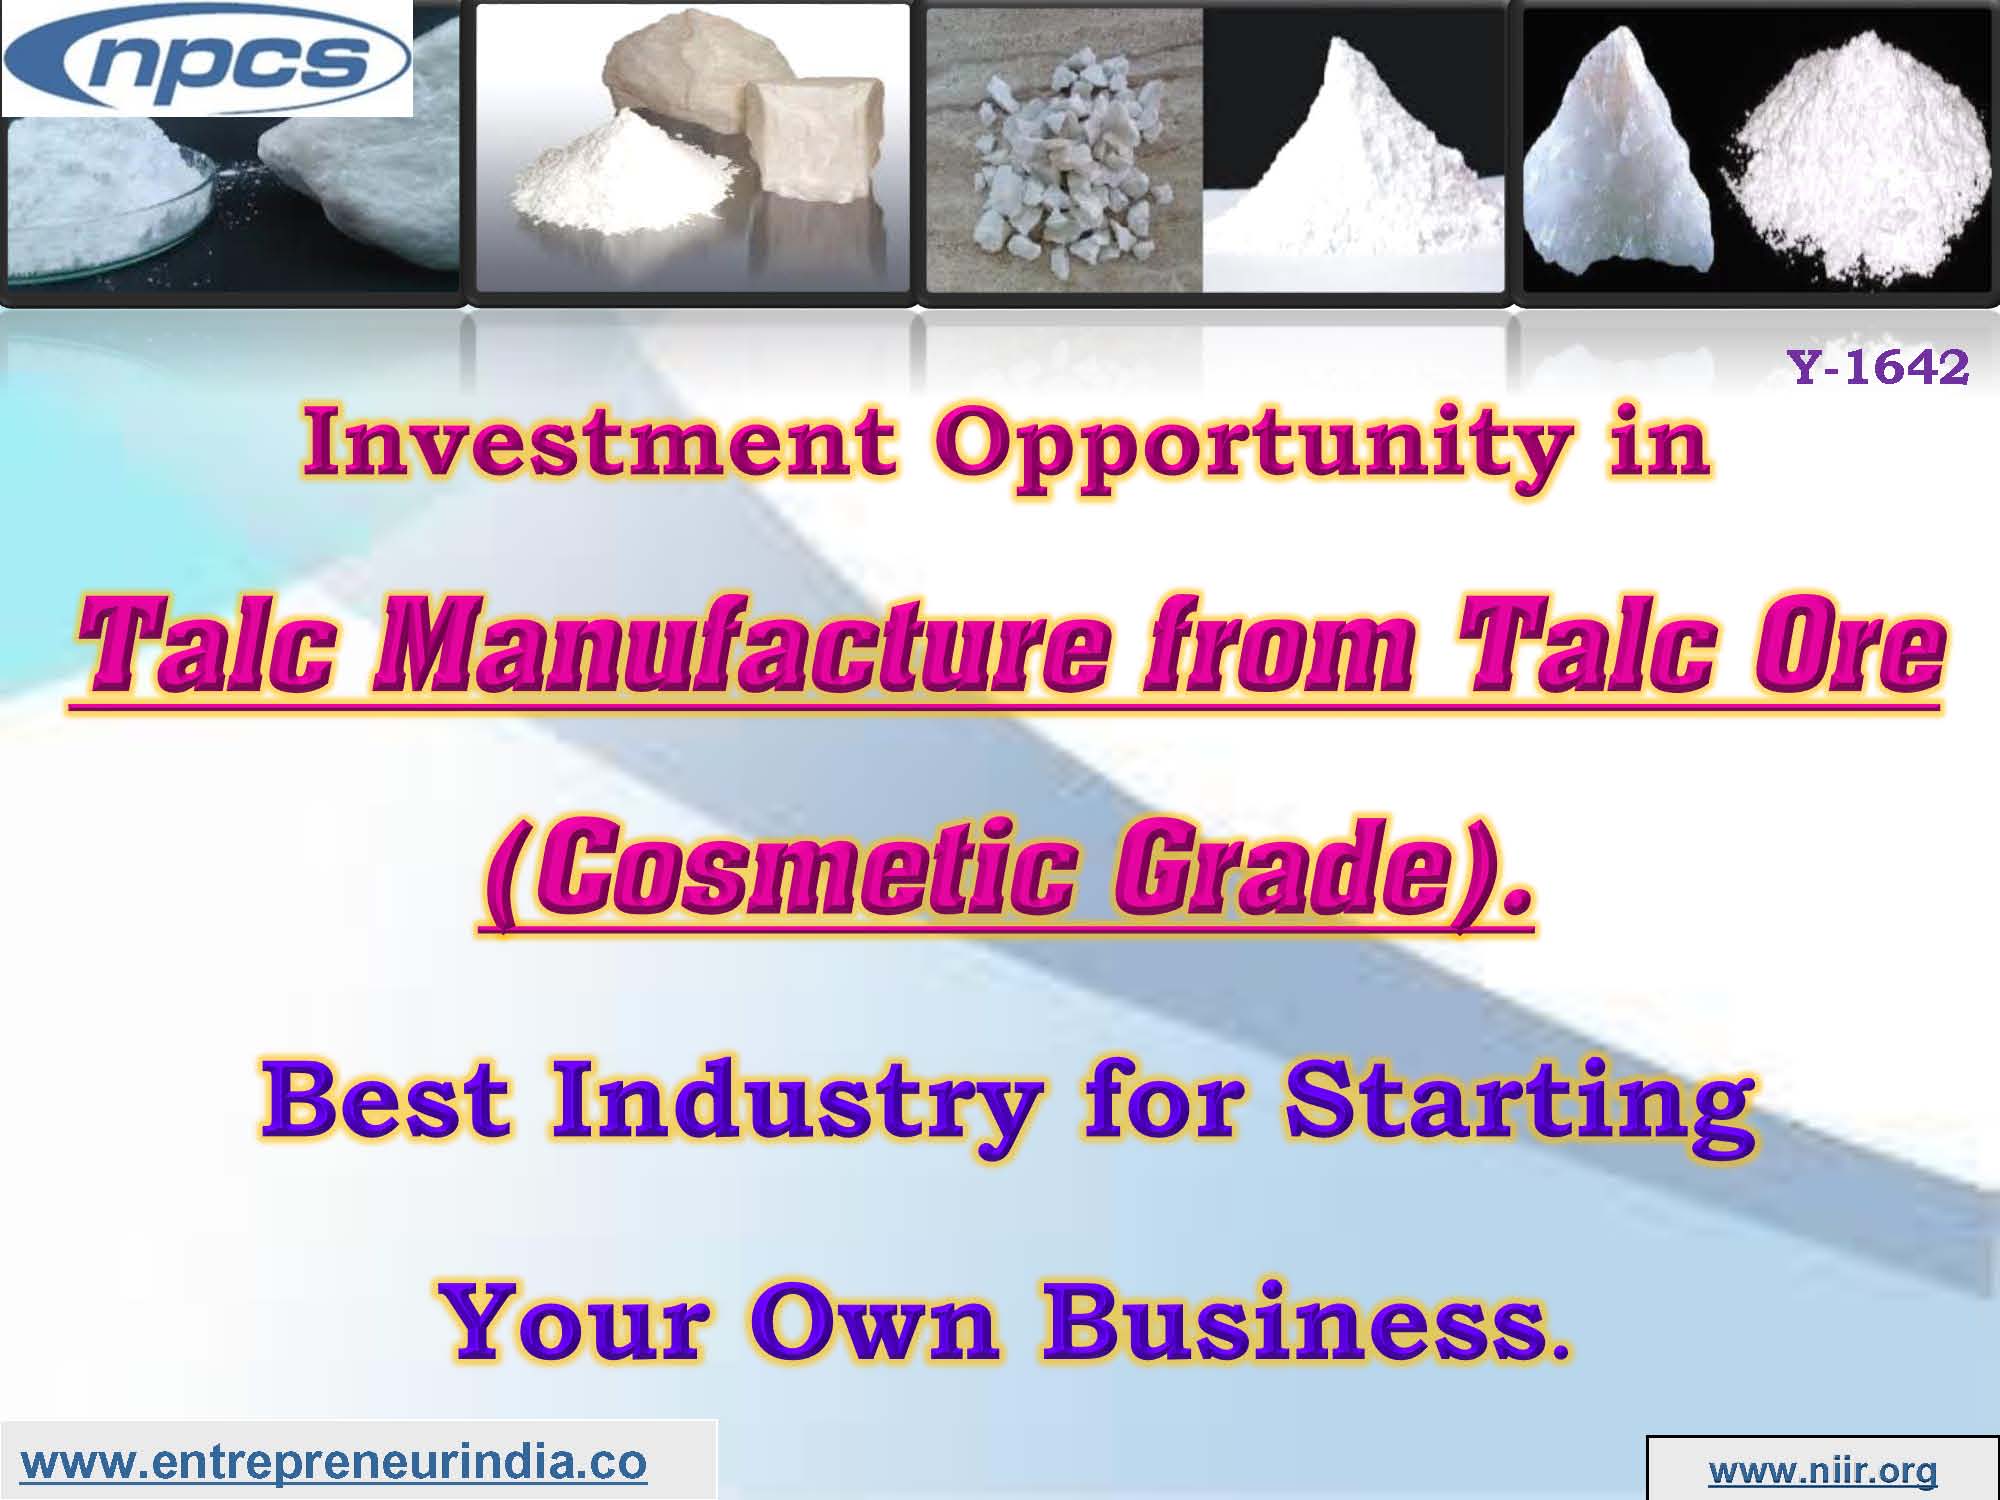 Investment Opportunity in Talc Manufacture from Talc Ore (Cosmetic Grade)